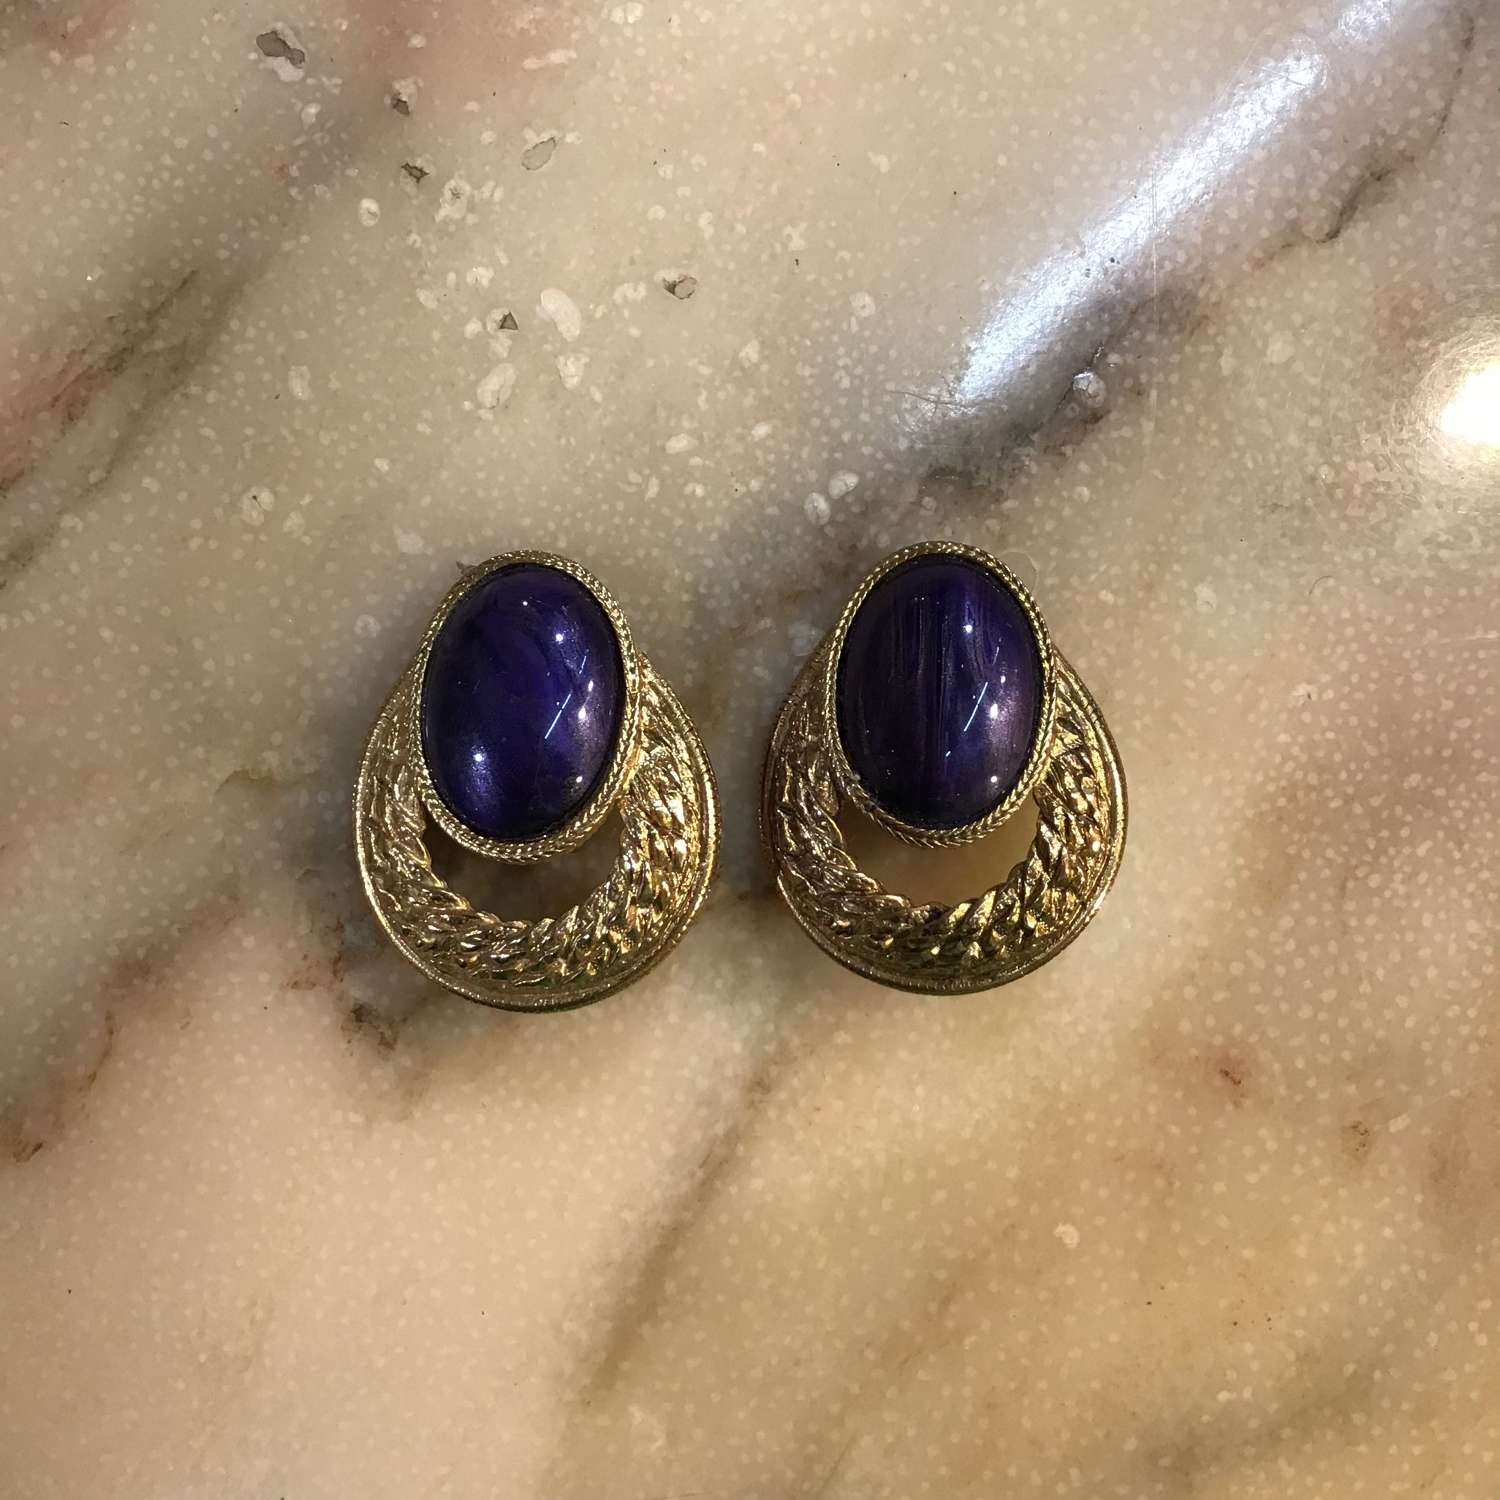 Vintage French Dauplaise  purple and gold clip earrings